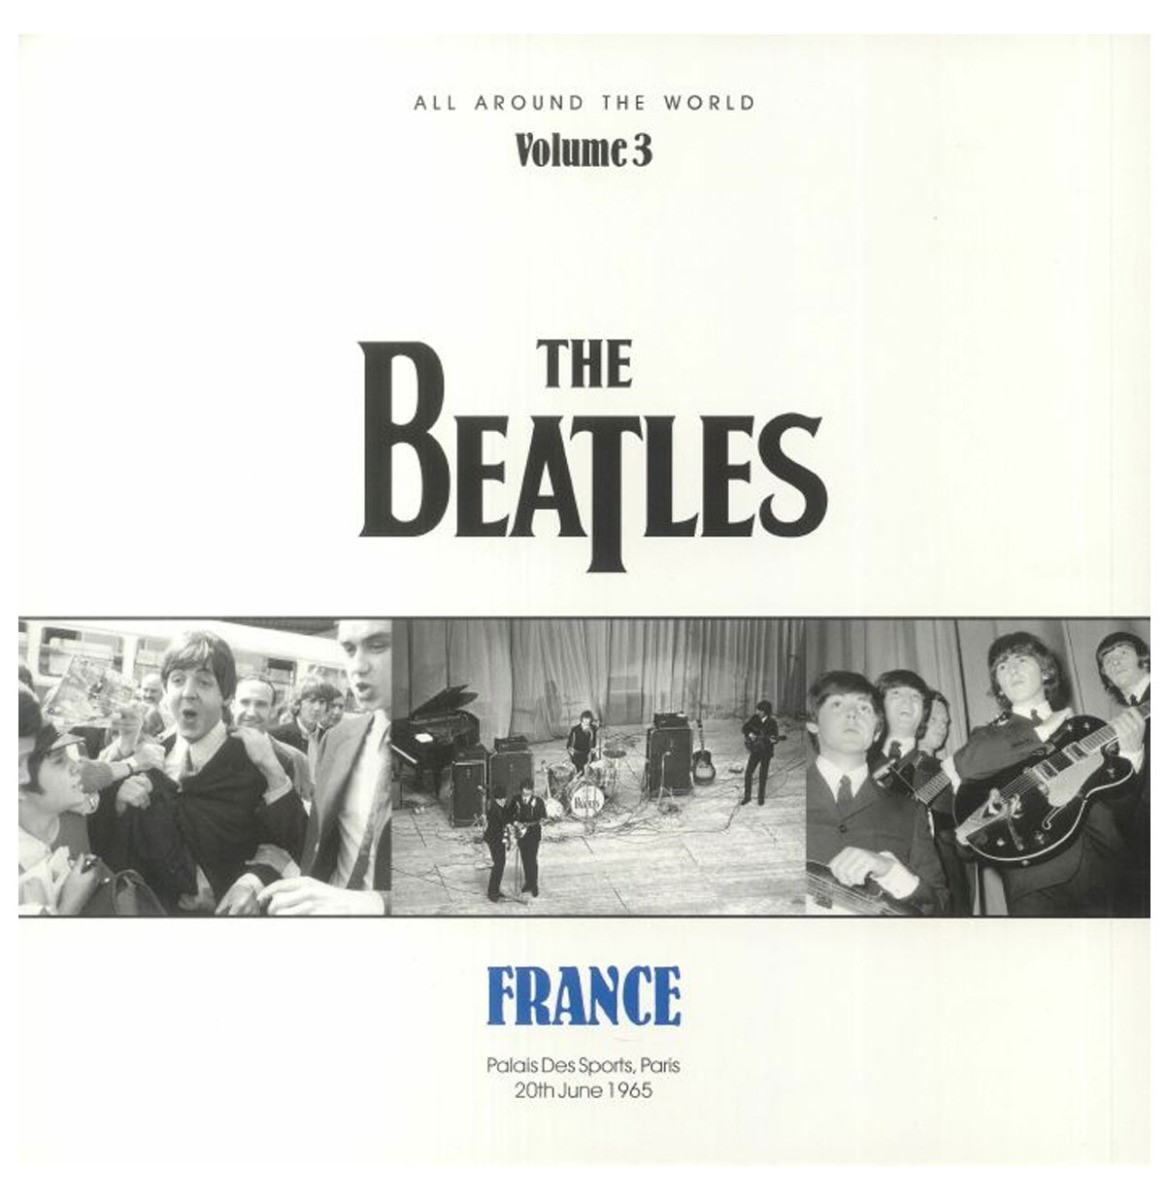 The Beatles - All Around The World Volume 3: France 1965 LP